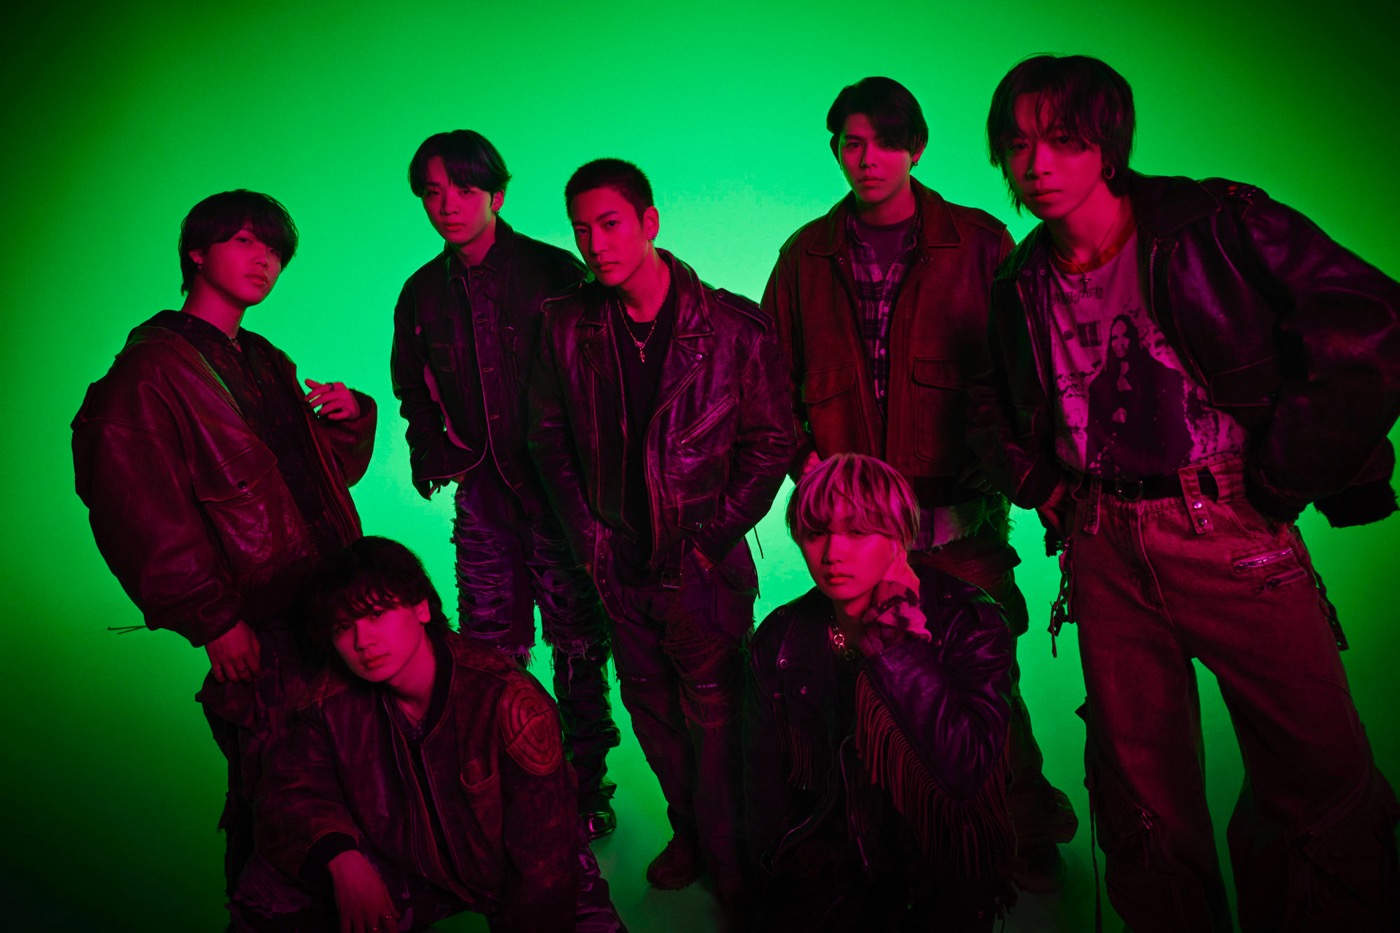 UVERworld×BE:FIRSTのツーマンが実現！都市フェス『INSPIRE TOKYO』第1弾出演者発表 - 画像一覧（5/8）